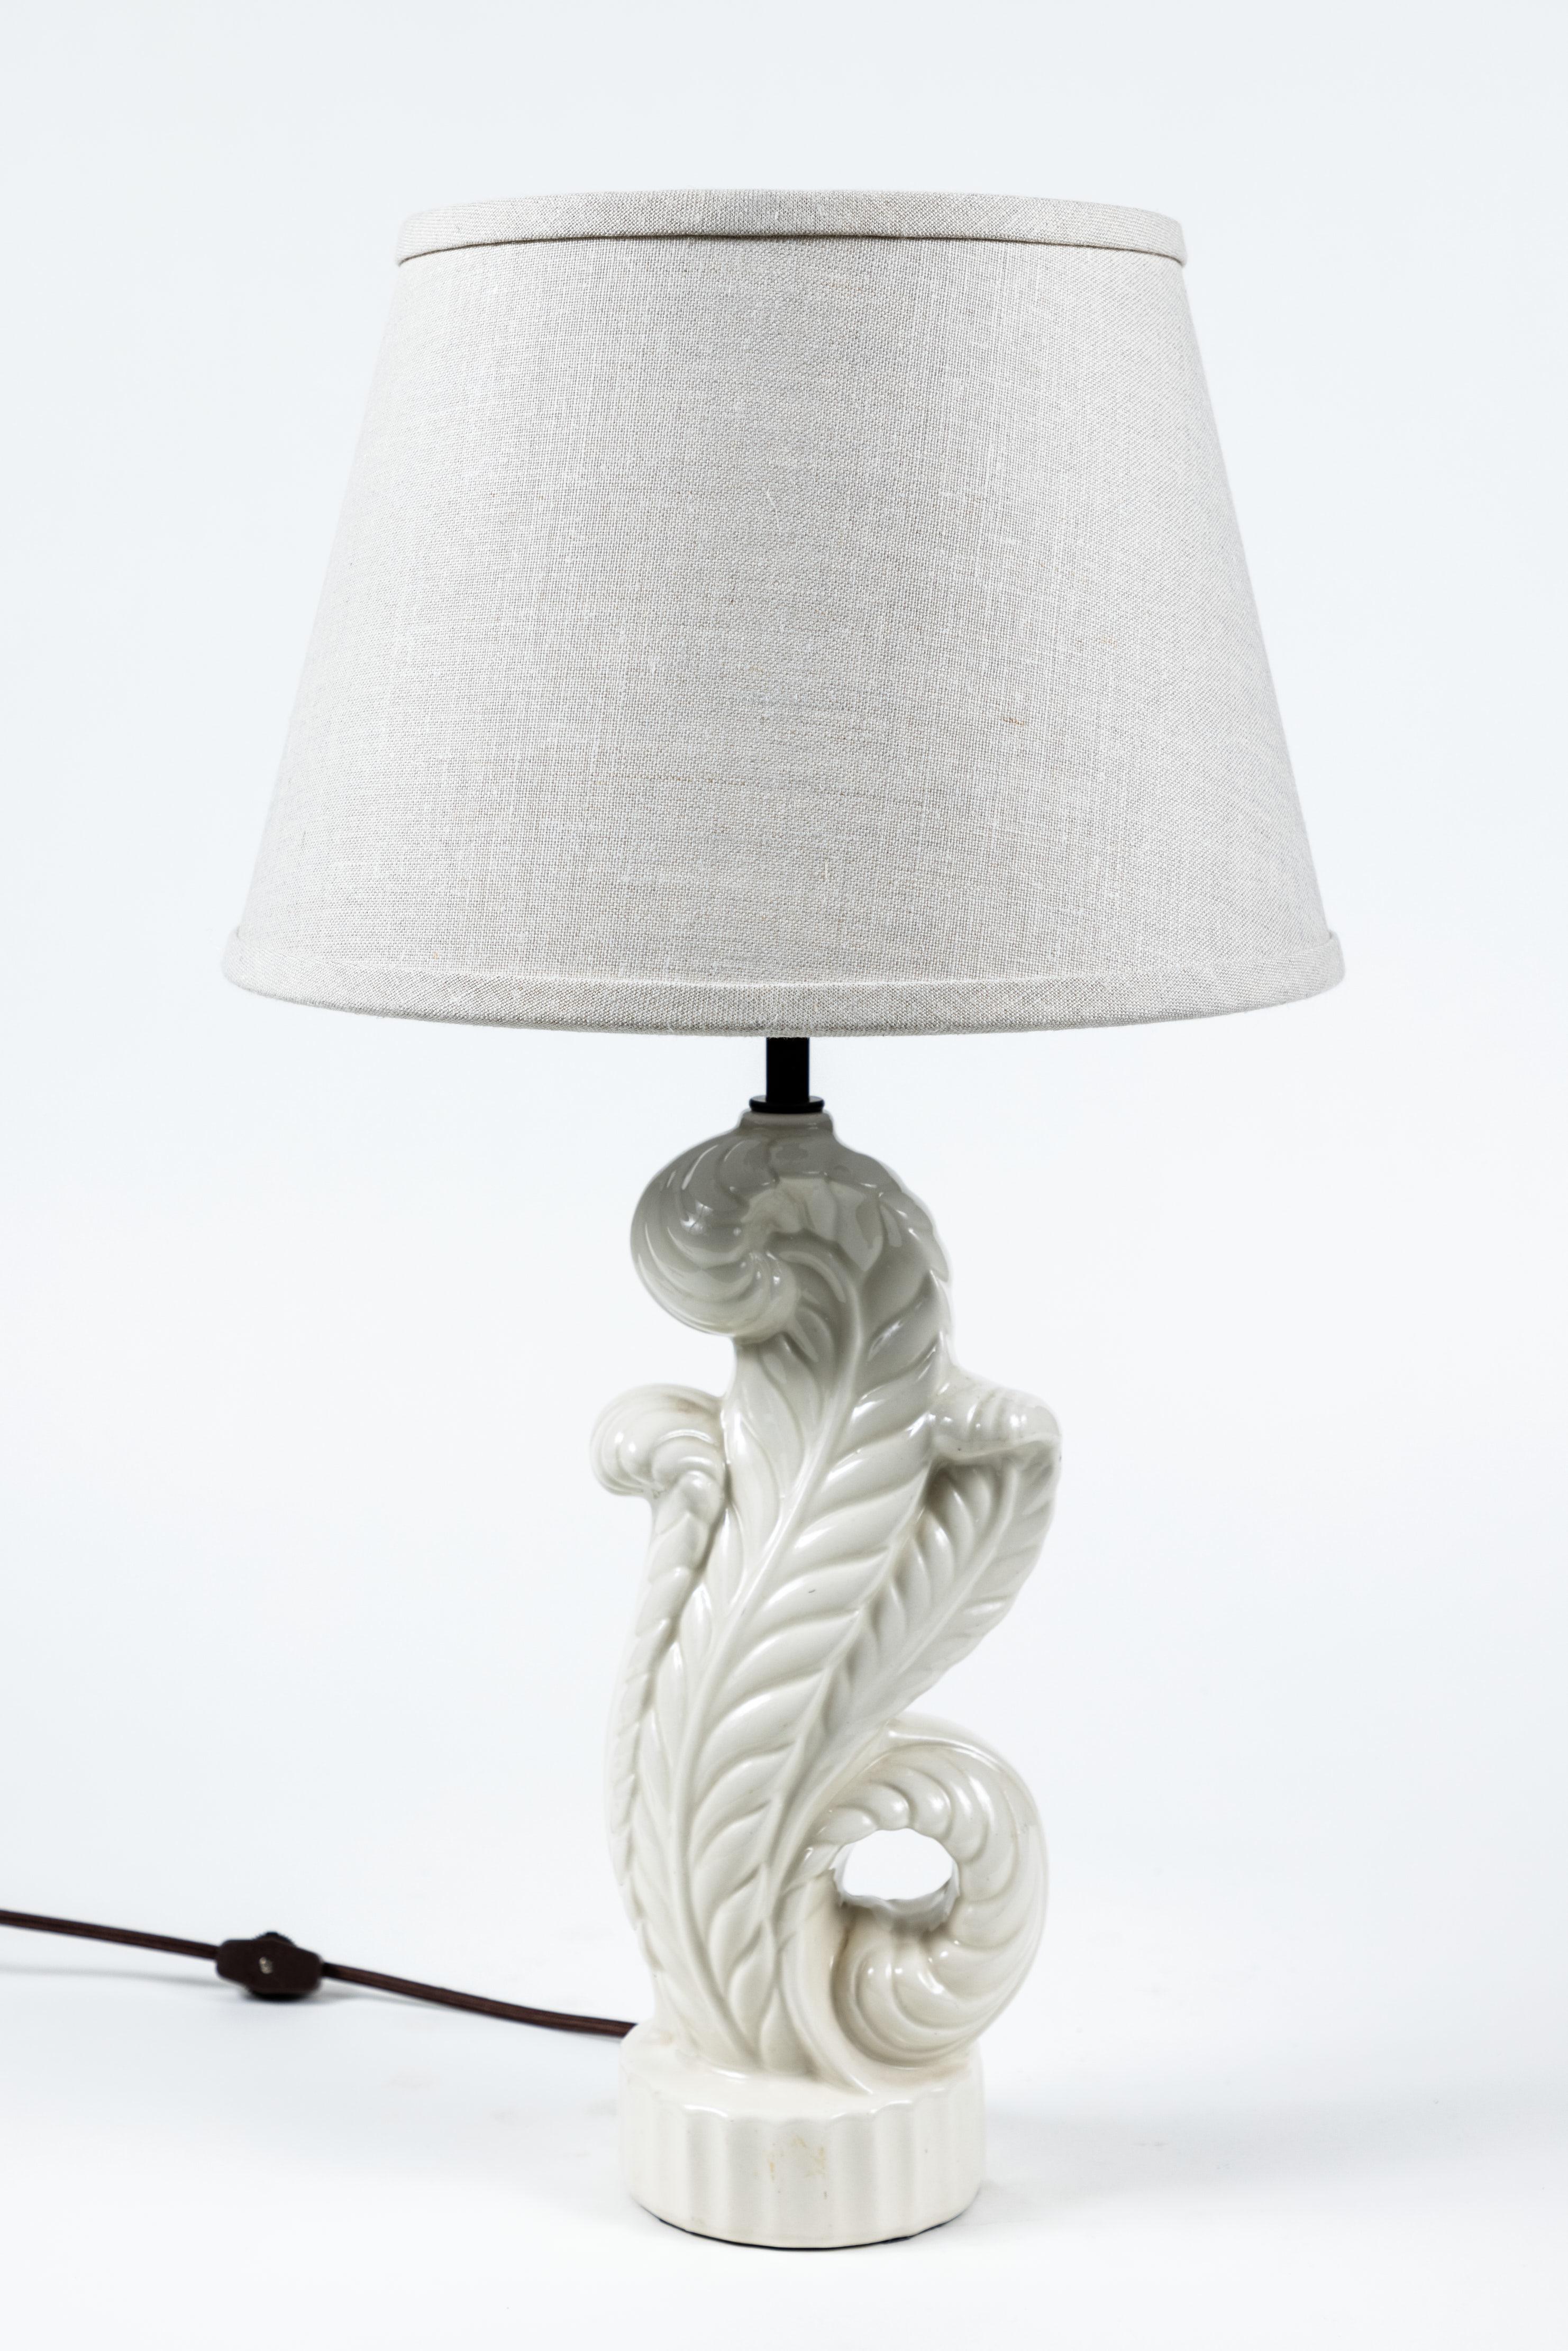 Vintage white pottery classic acanthus leaf lamp. Lamp has been newly rewired and has a new custom made linen shade.